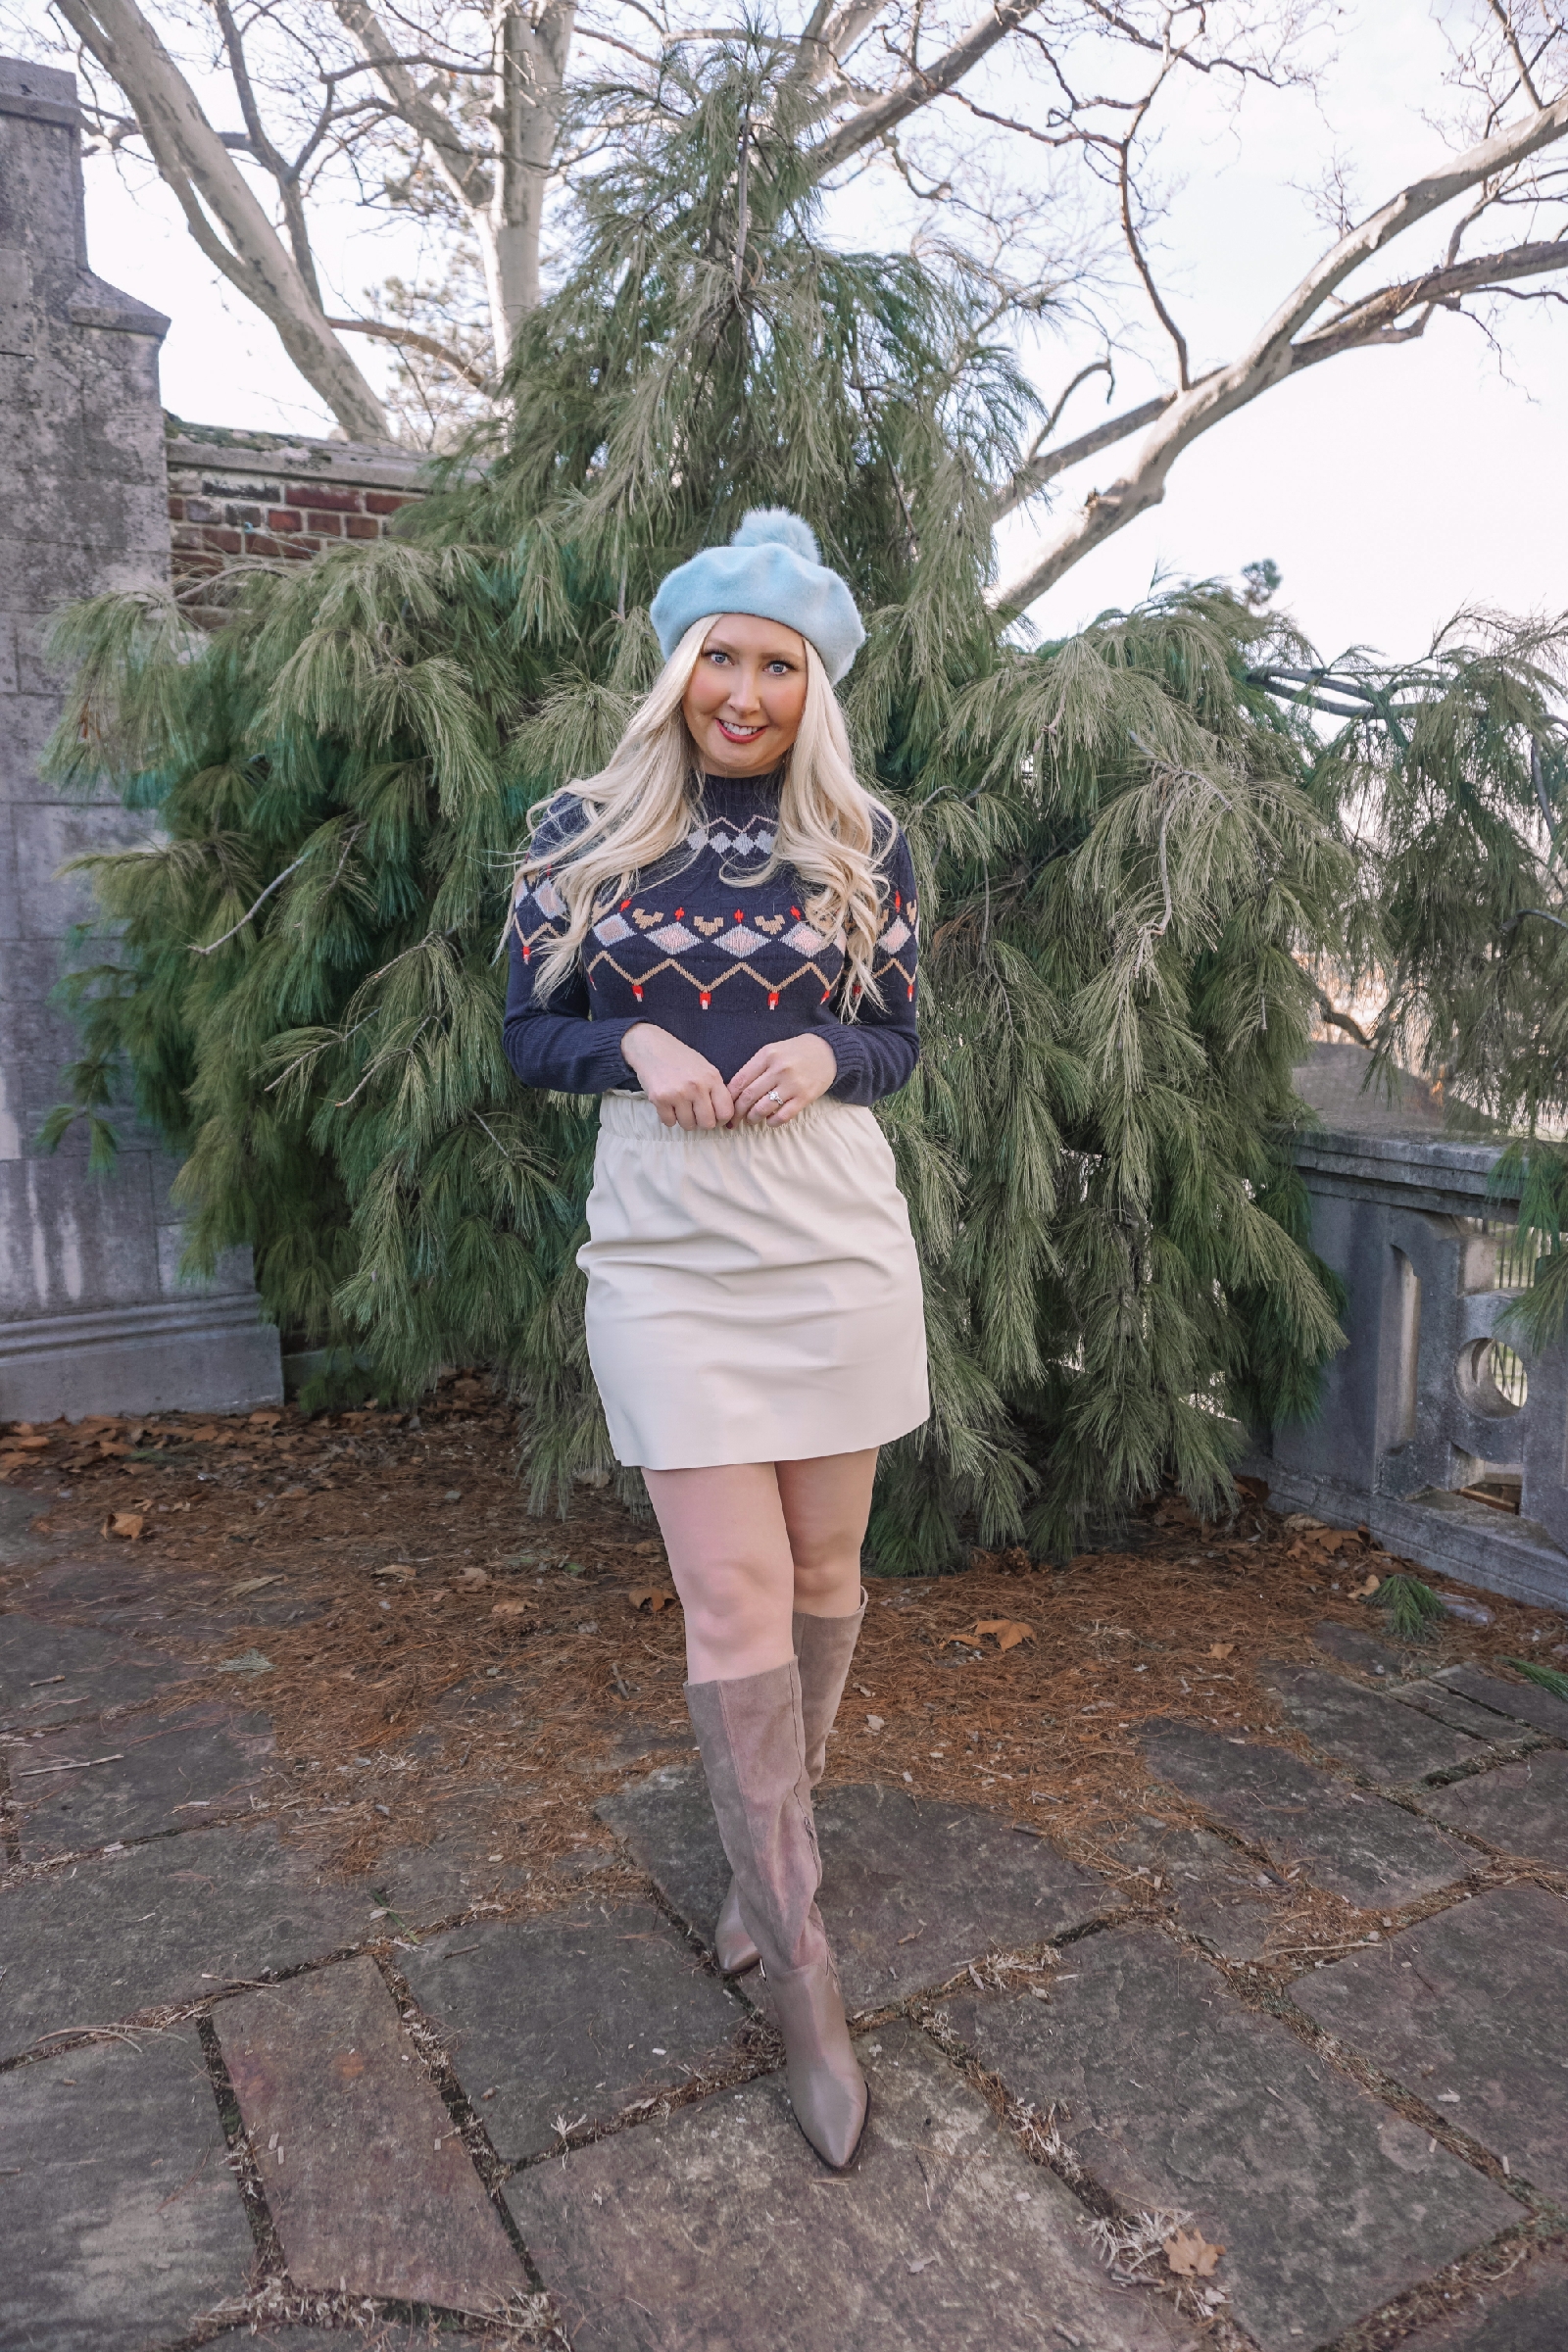 SWEATER AND SKIRT COMBINATIONS FOR WINTER - Classic Meets Chic